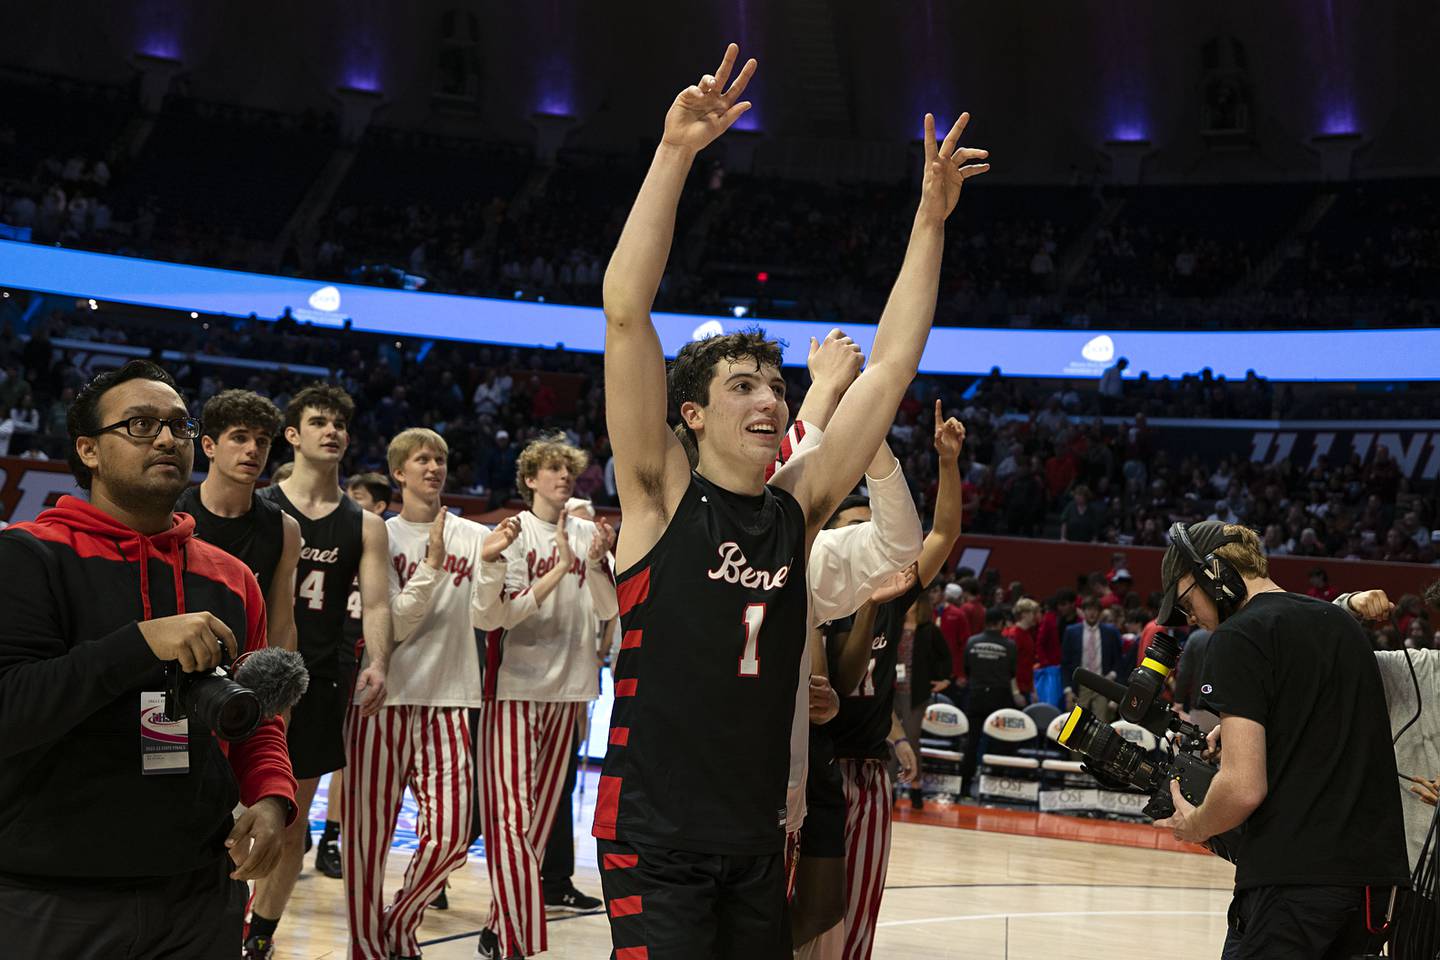 Benet Academy’s Sam Driscoll celebrates the RedWings’ win over New Trier on Friday, March 10, 2023, during the Class 4A IHSA semifinals.